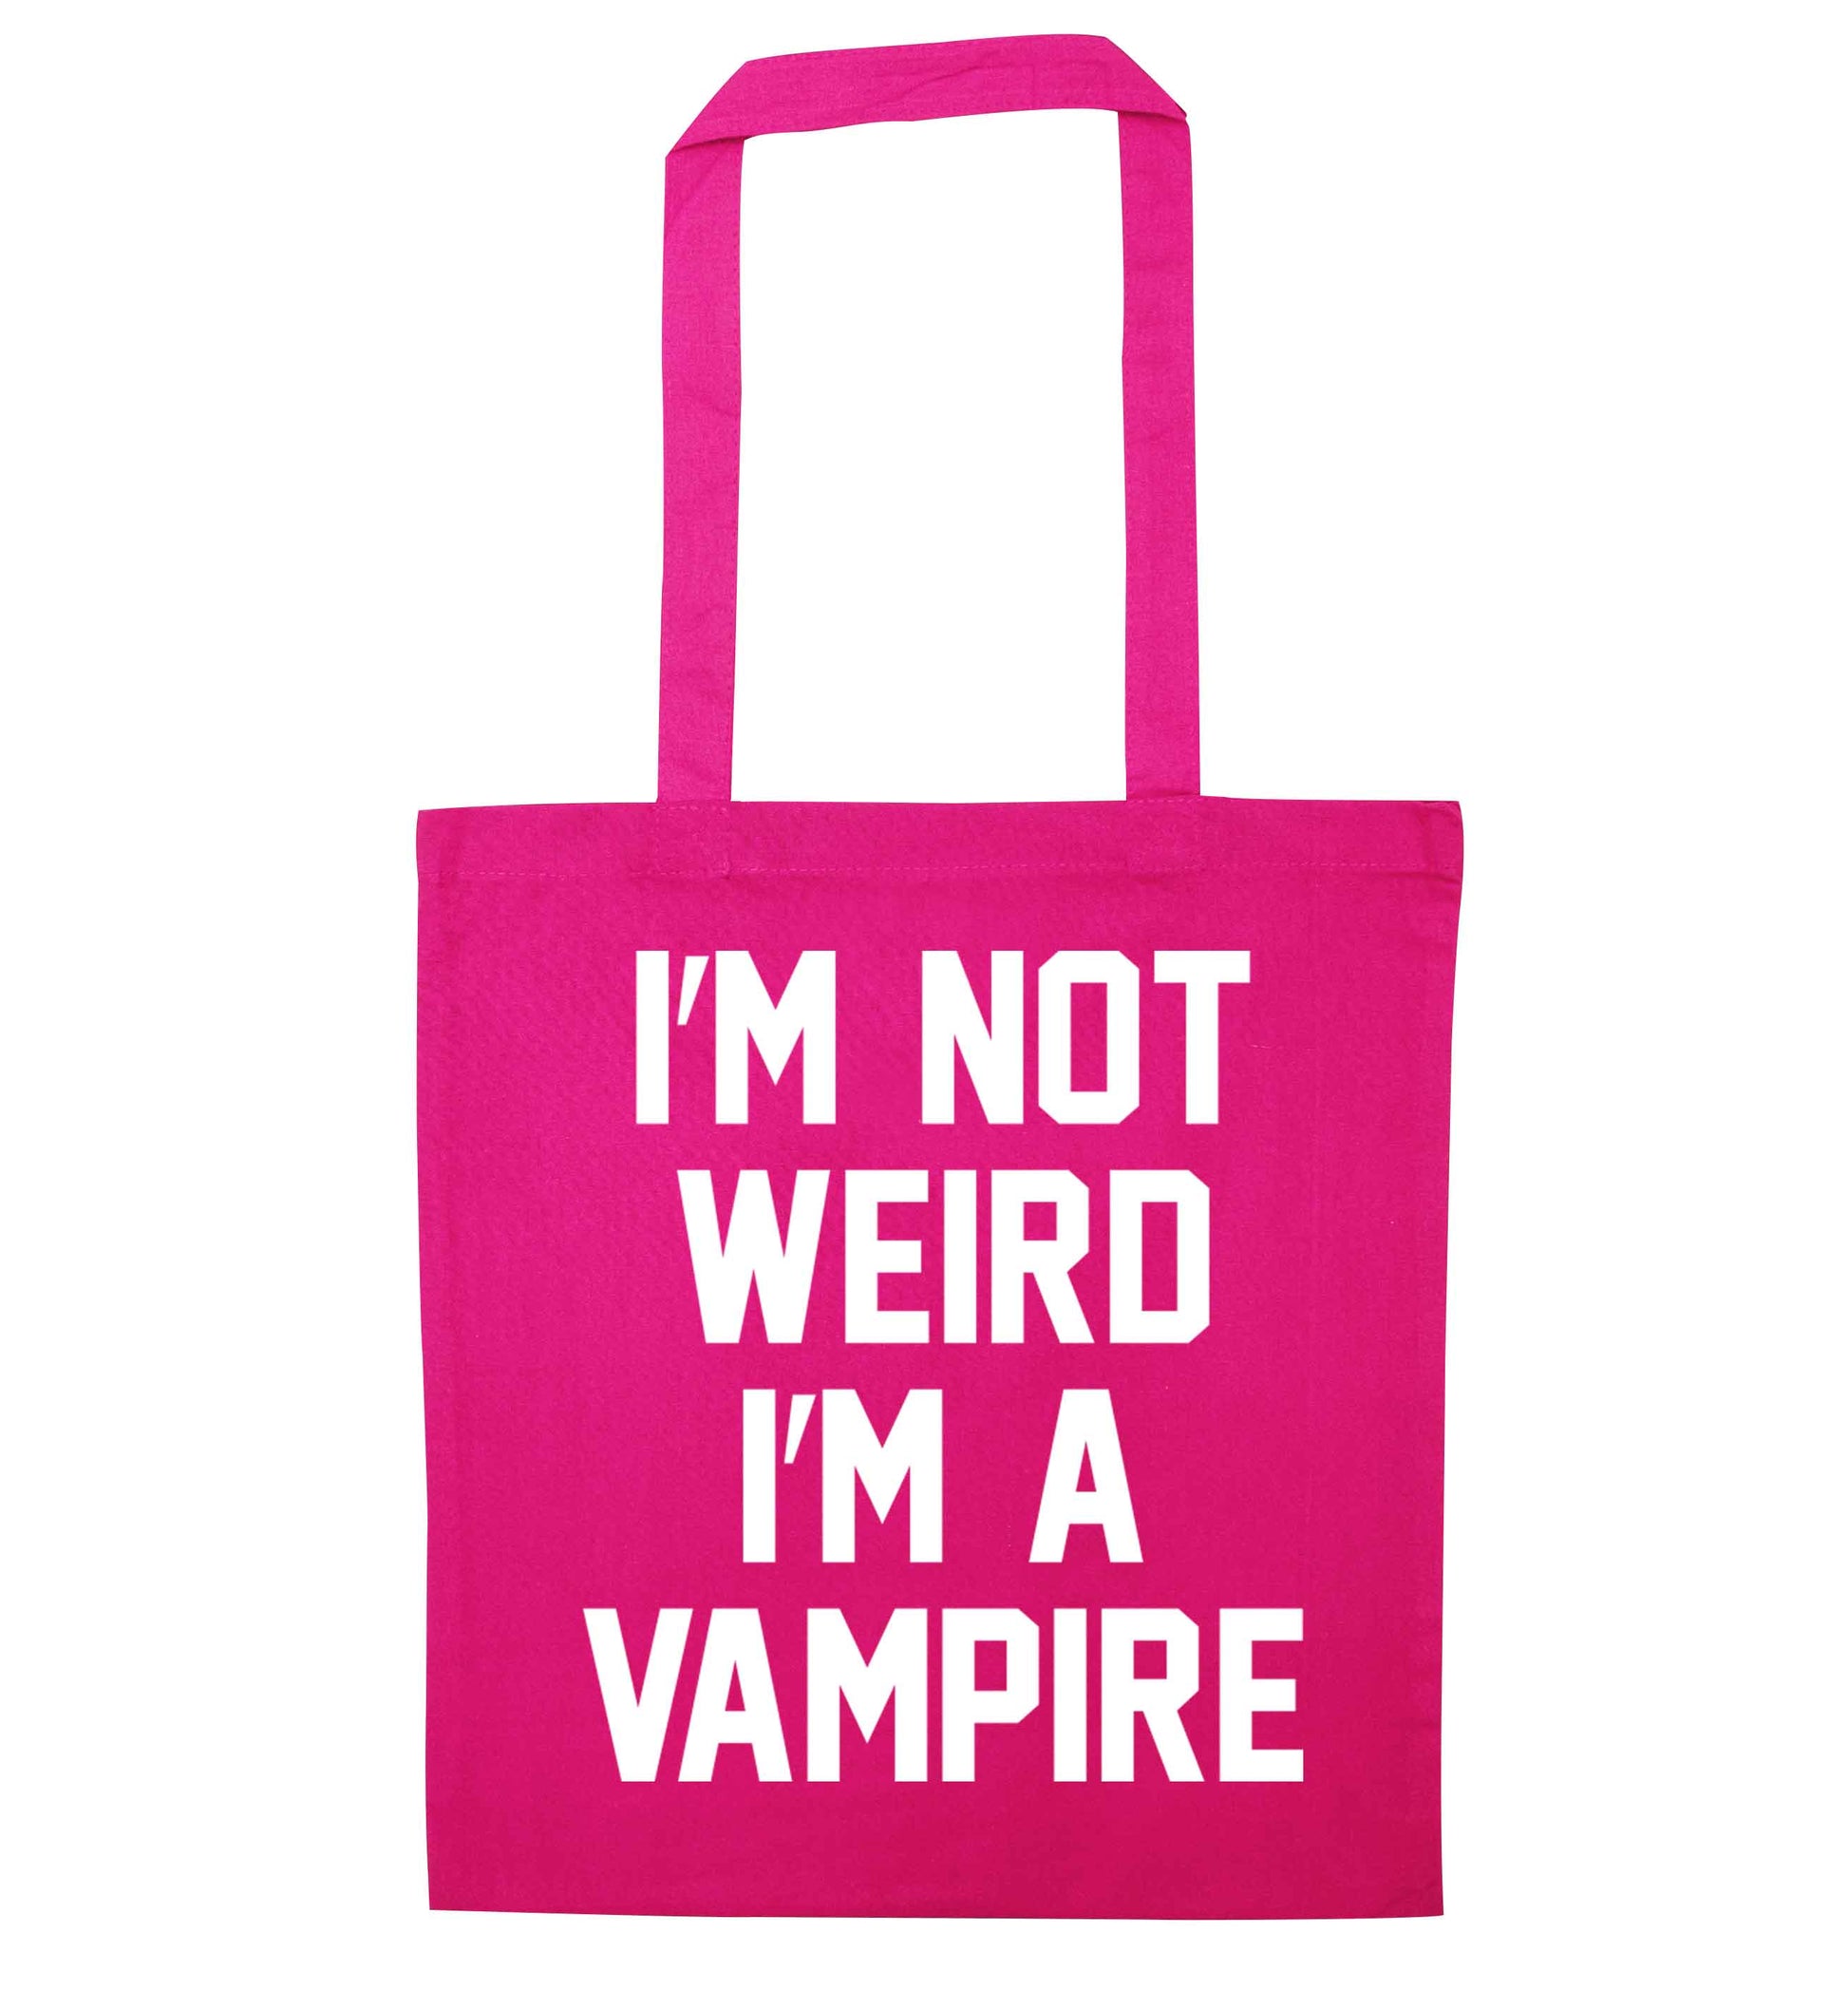 I'm not weird I'm a vampire pink tote bag